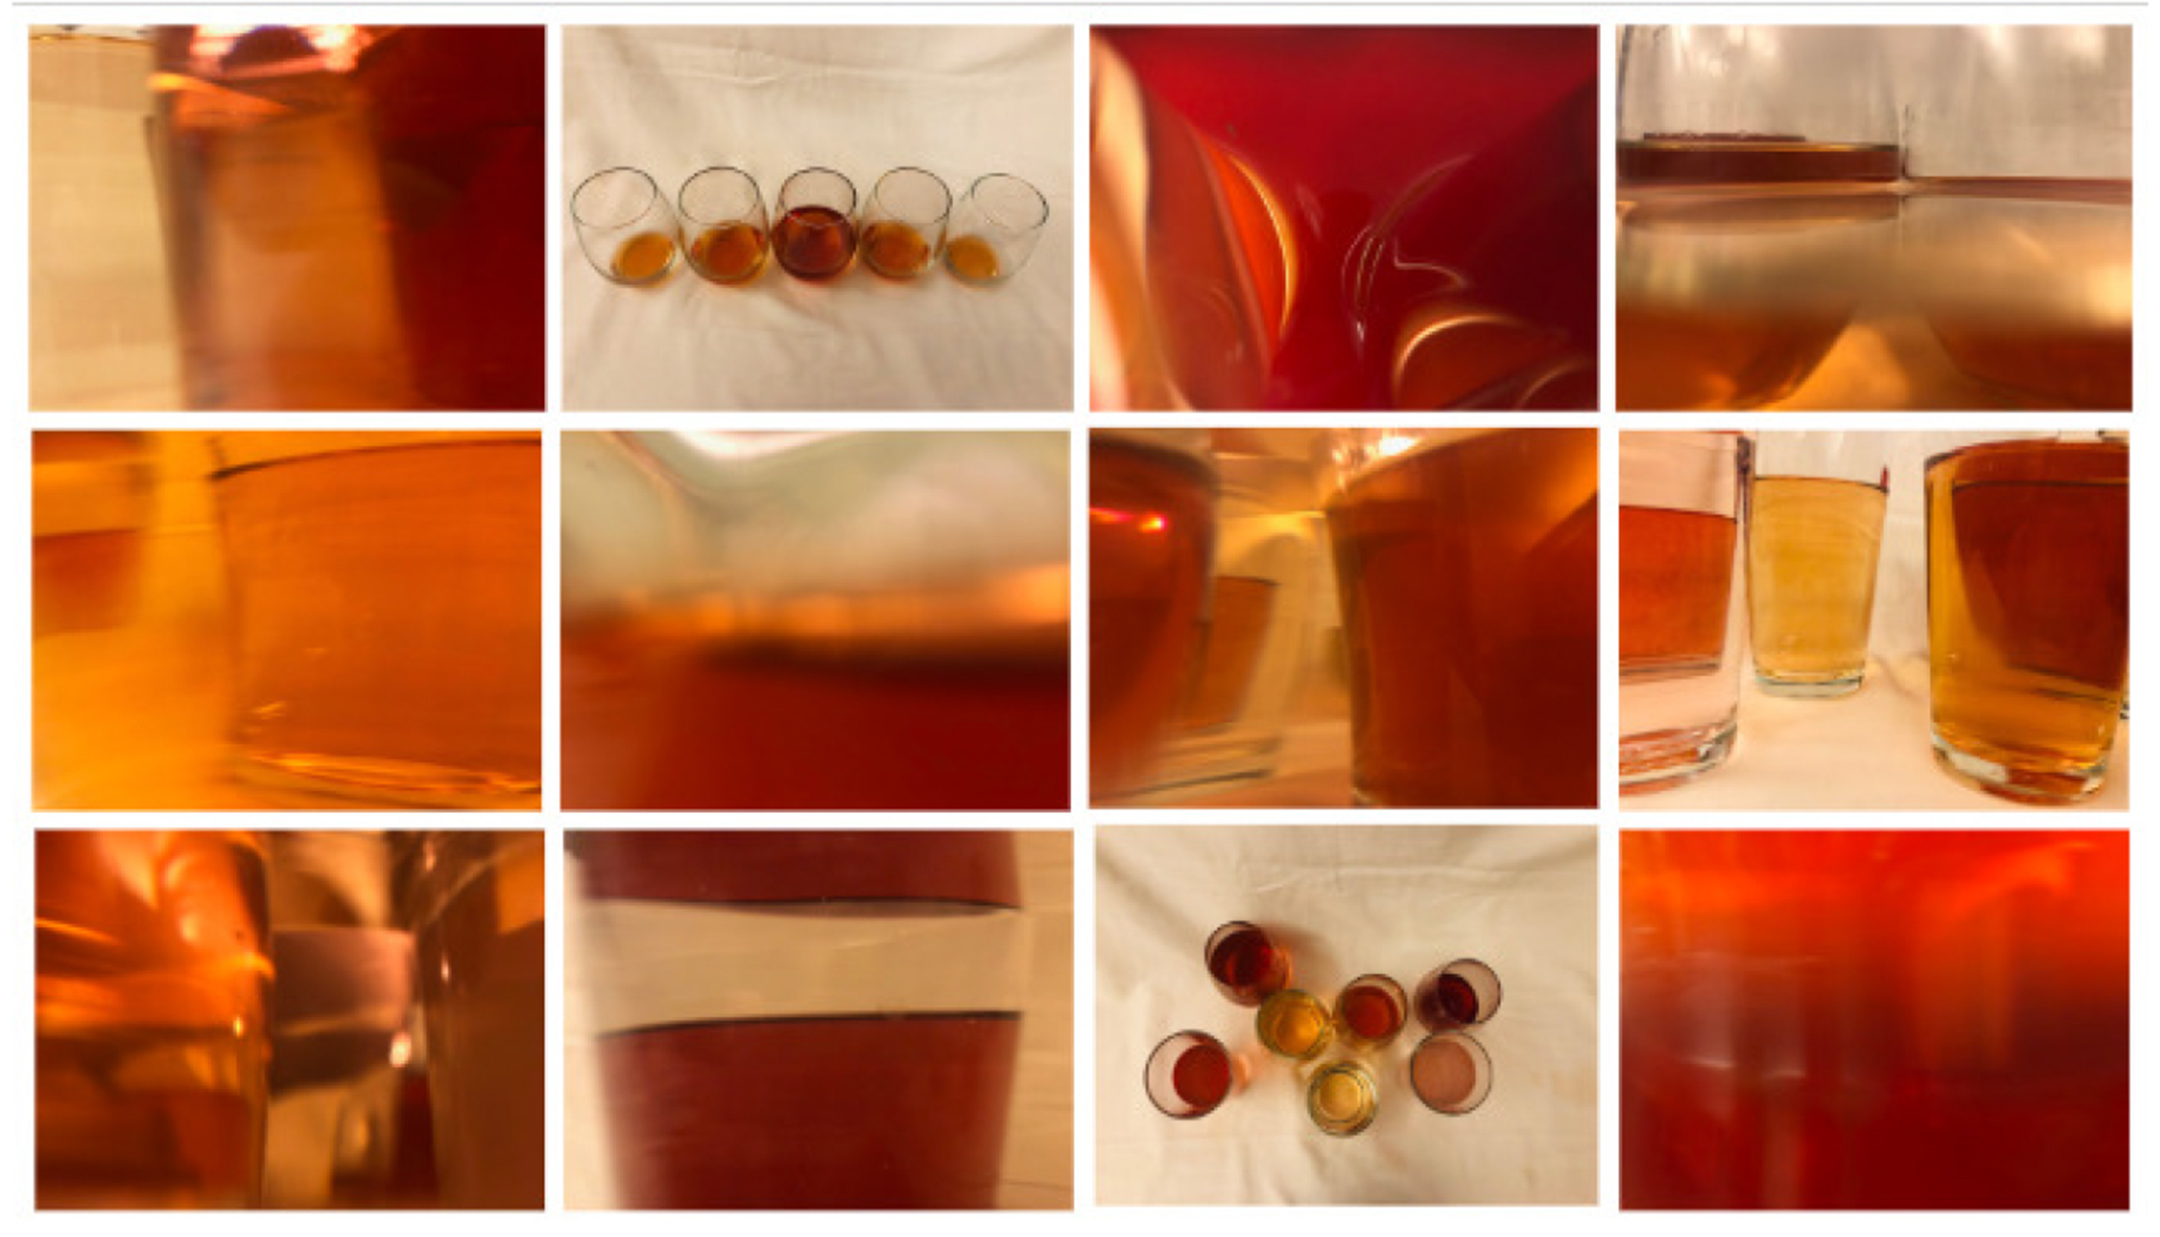 Grid of 12 photographs, four by three, of objects taken in closeup in amber light